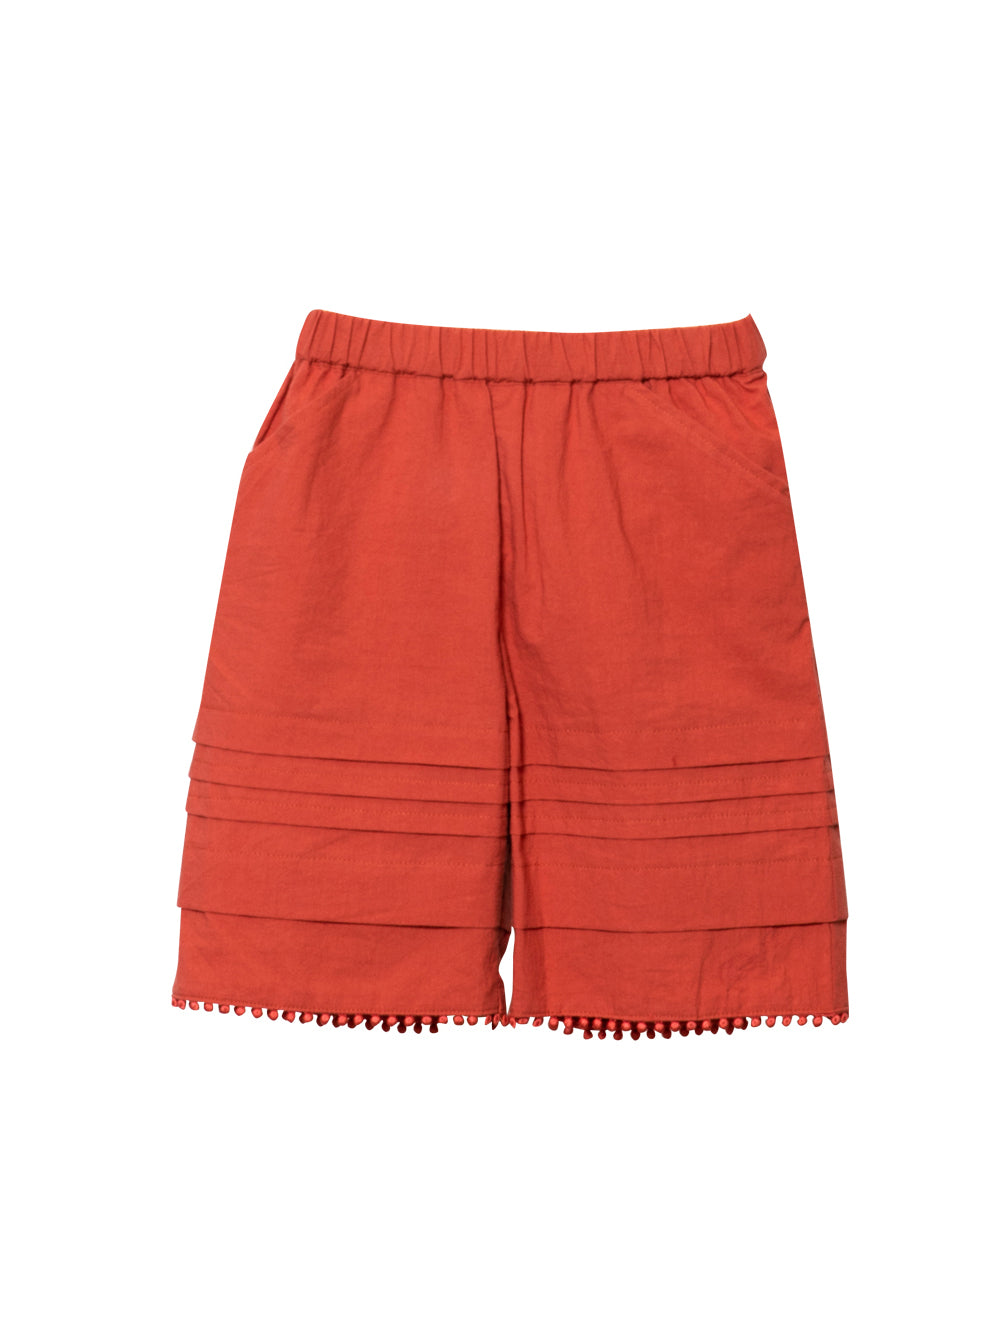 Red Tuck Shorts